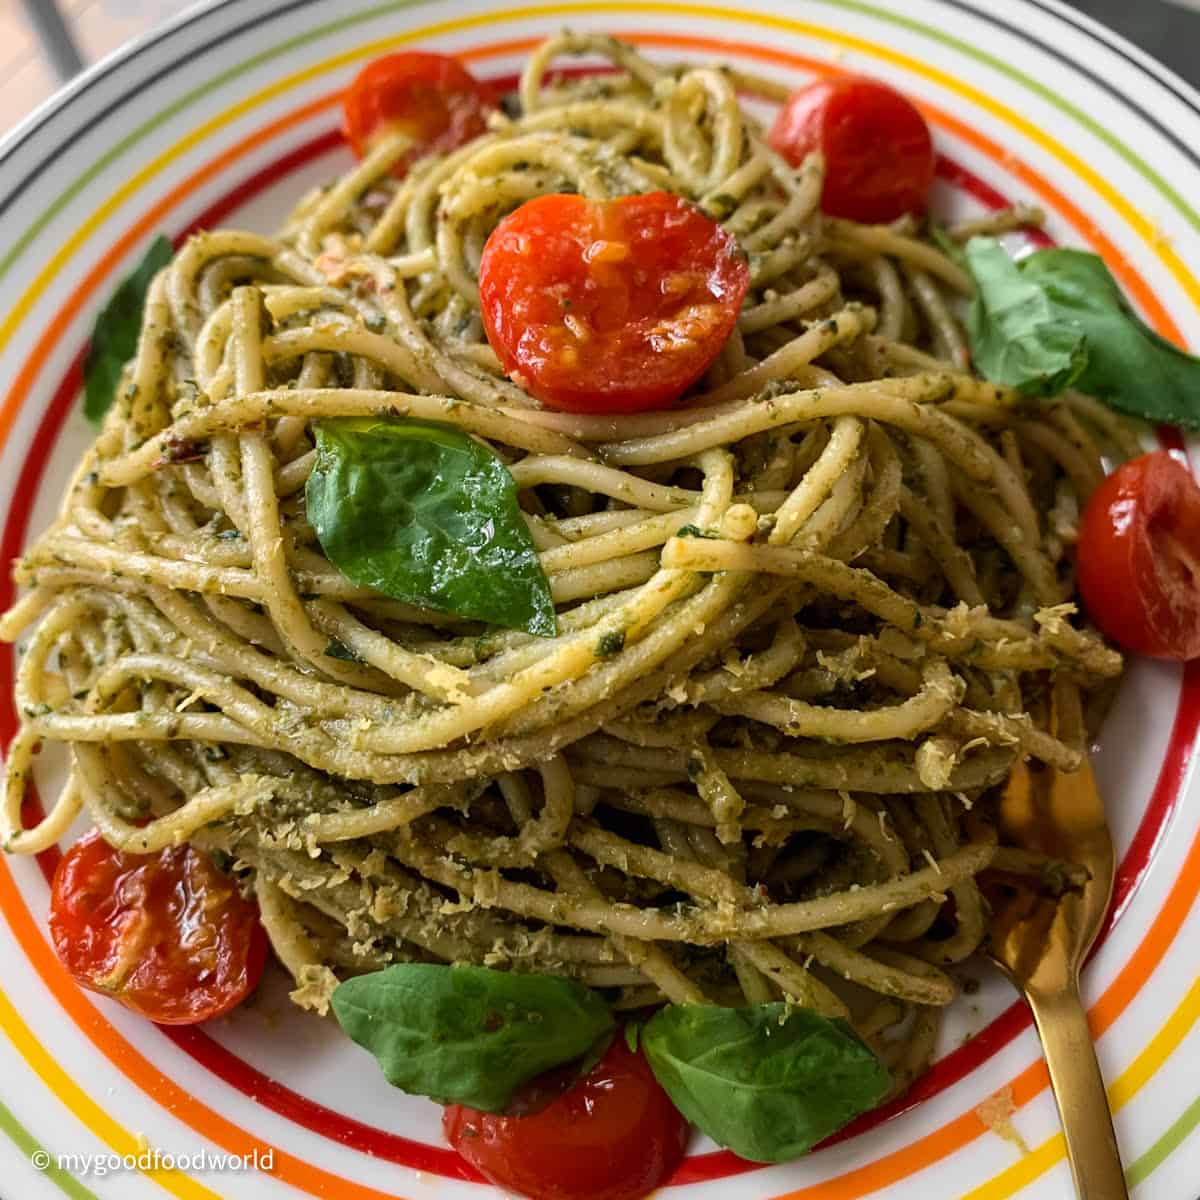 Cooked pasta that has been tossed in pesto sauce is placed in a mounds on a colourful plate. The pasta is topped with roasted cherry tomatoes and yeast flakes. Some fresh basil leaves are placed on the dish.